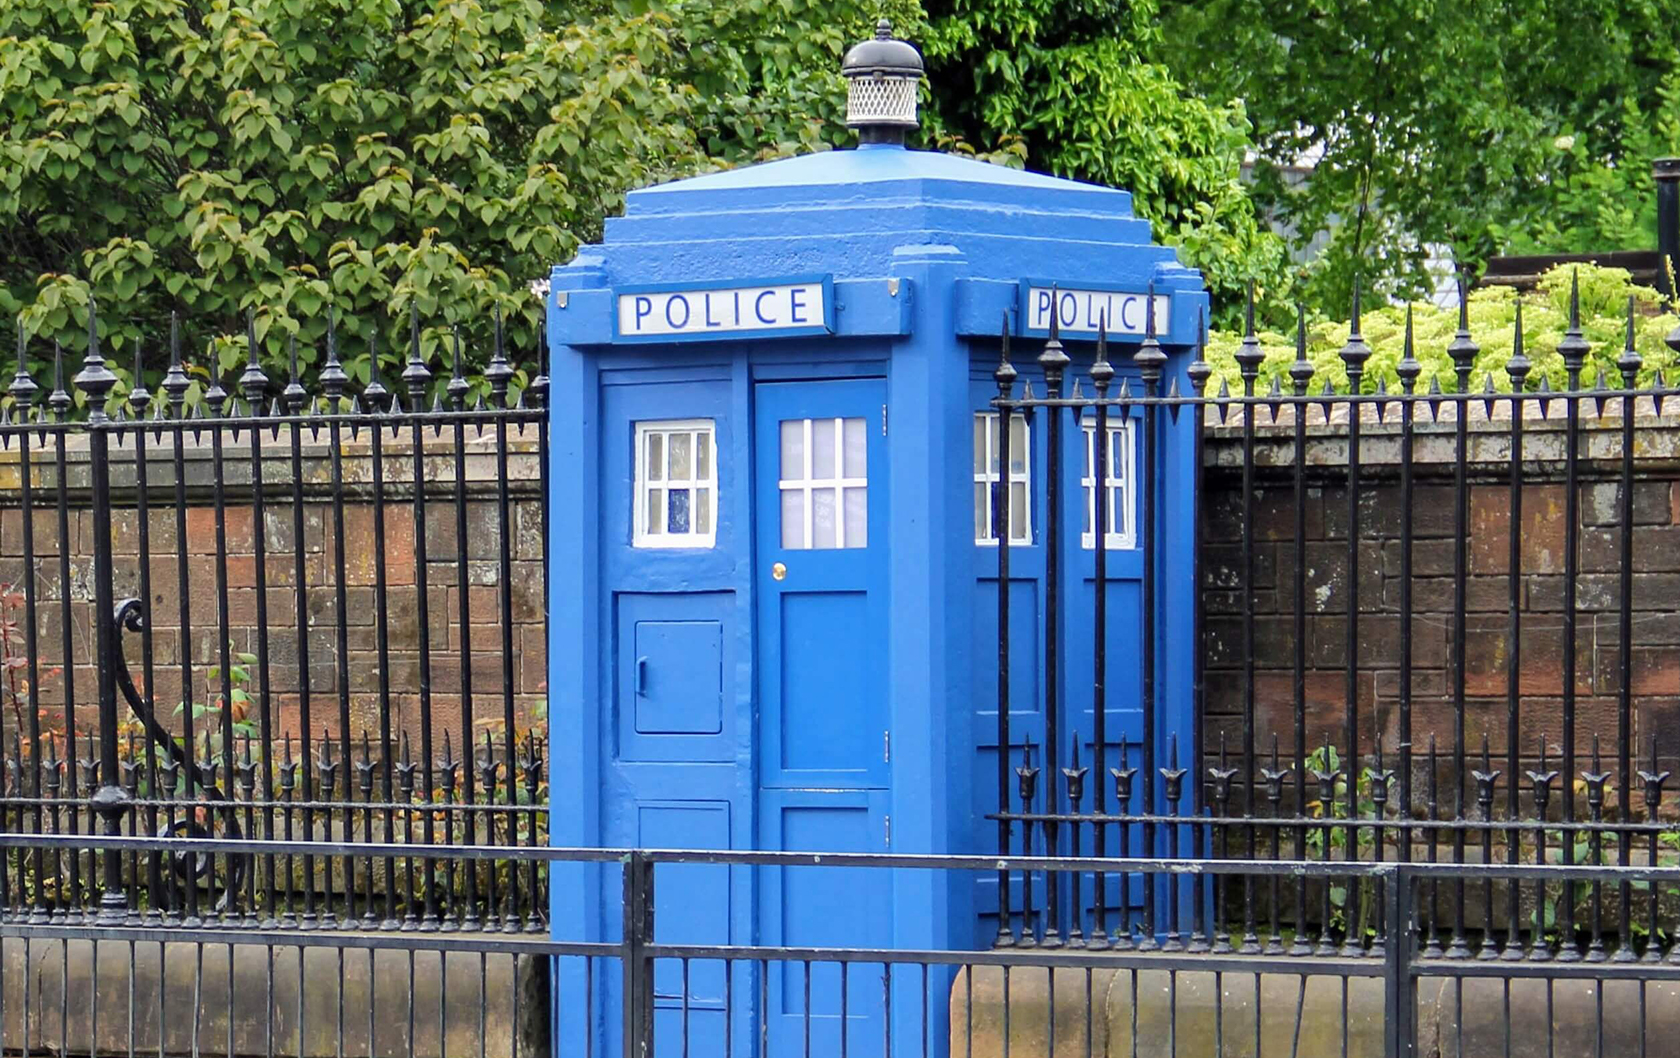 Calling All Doctor Who Fans! The Tardis Is Waiting On These London Tours